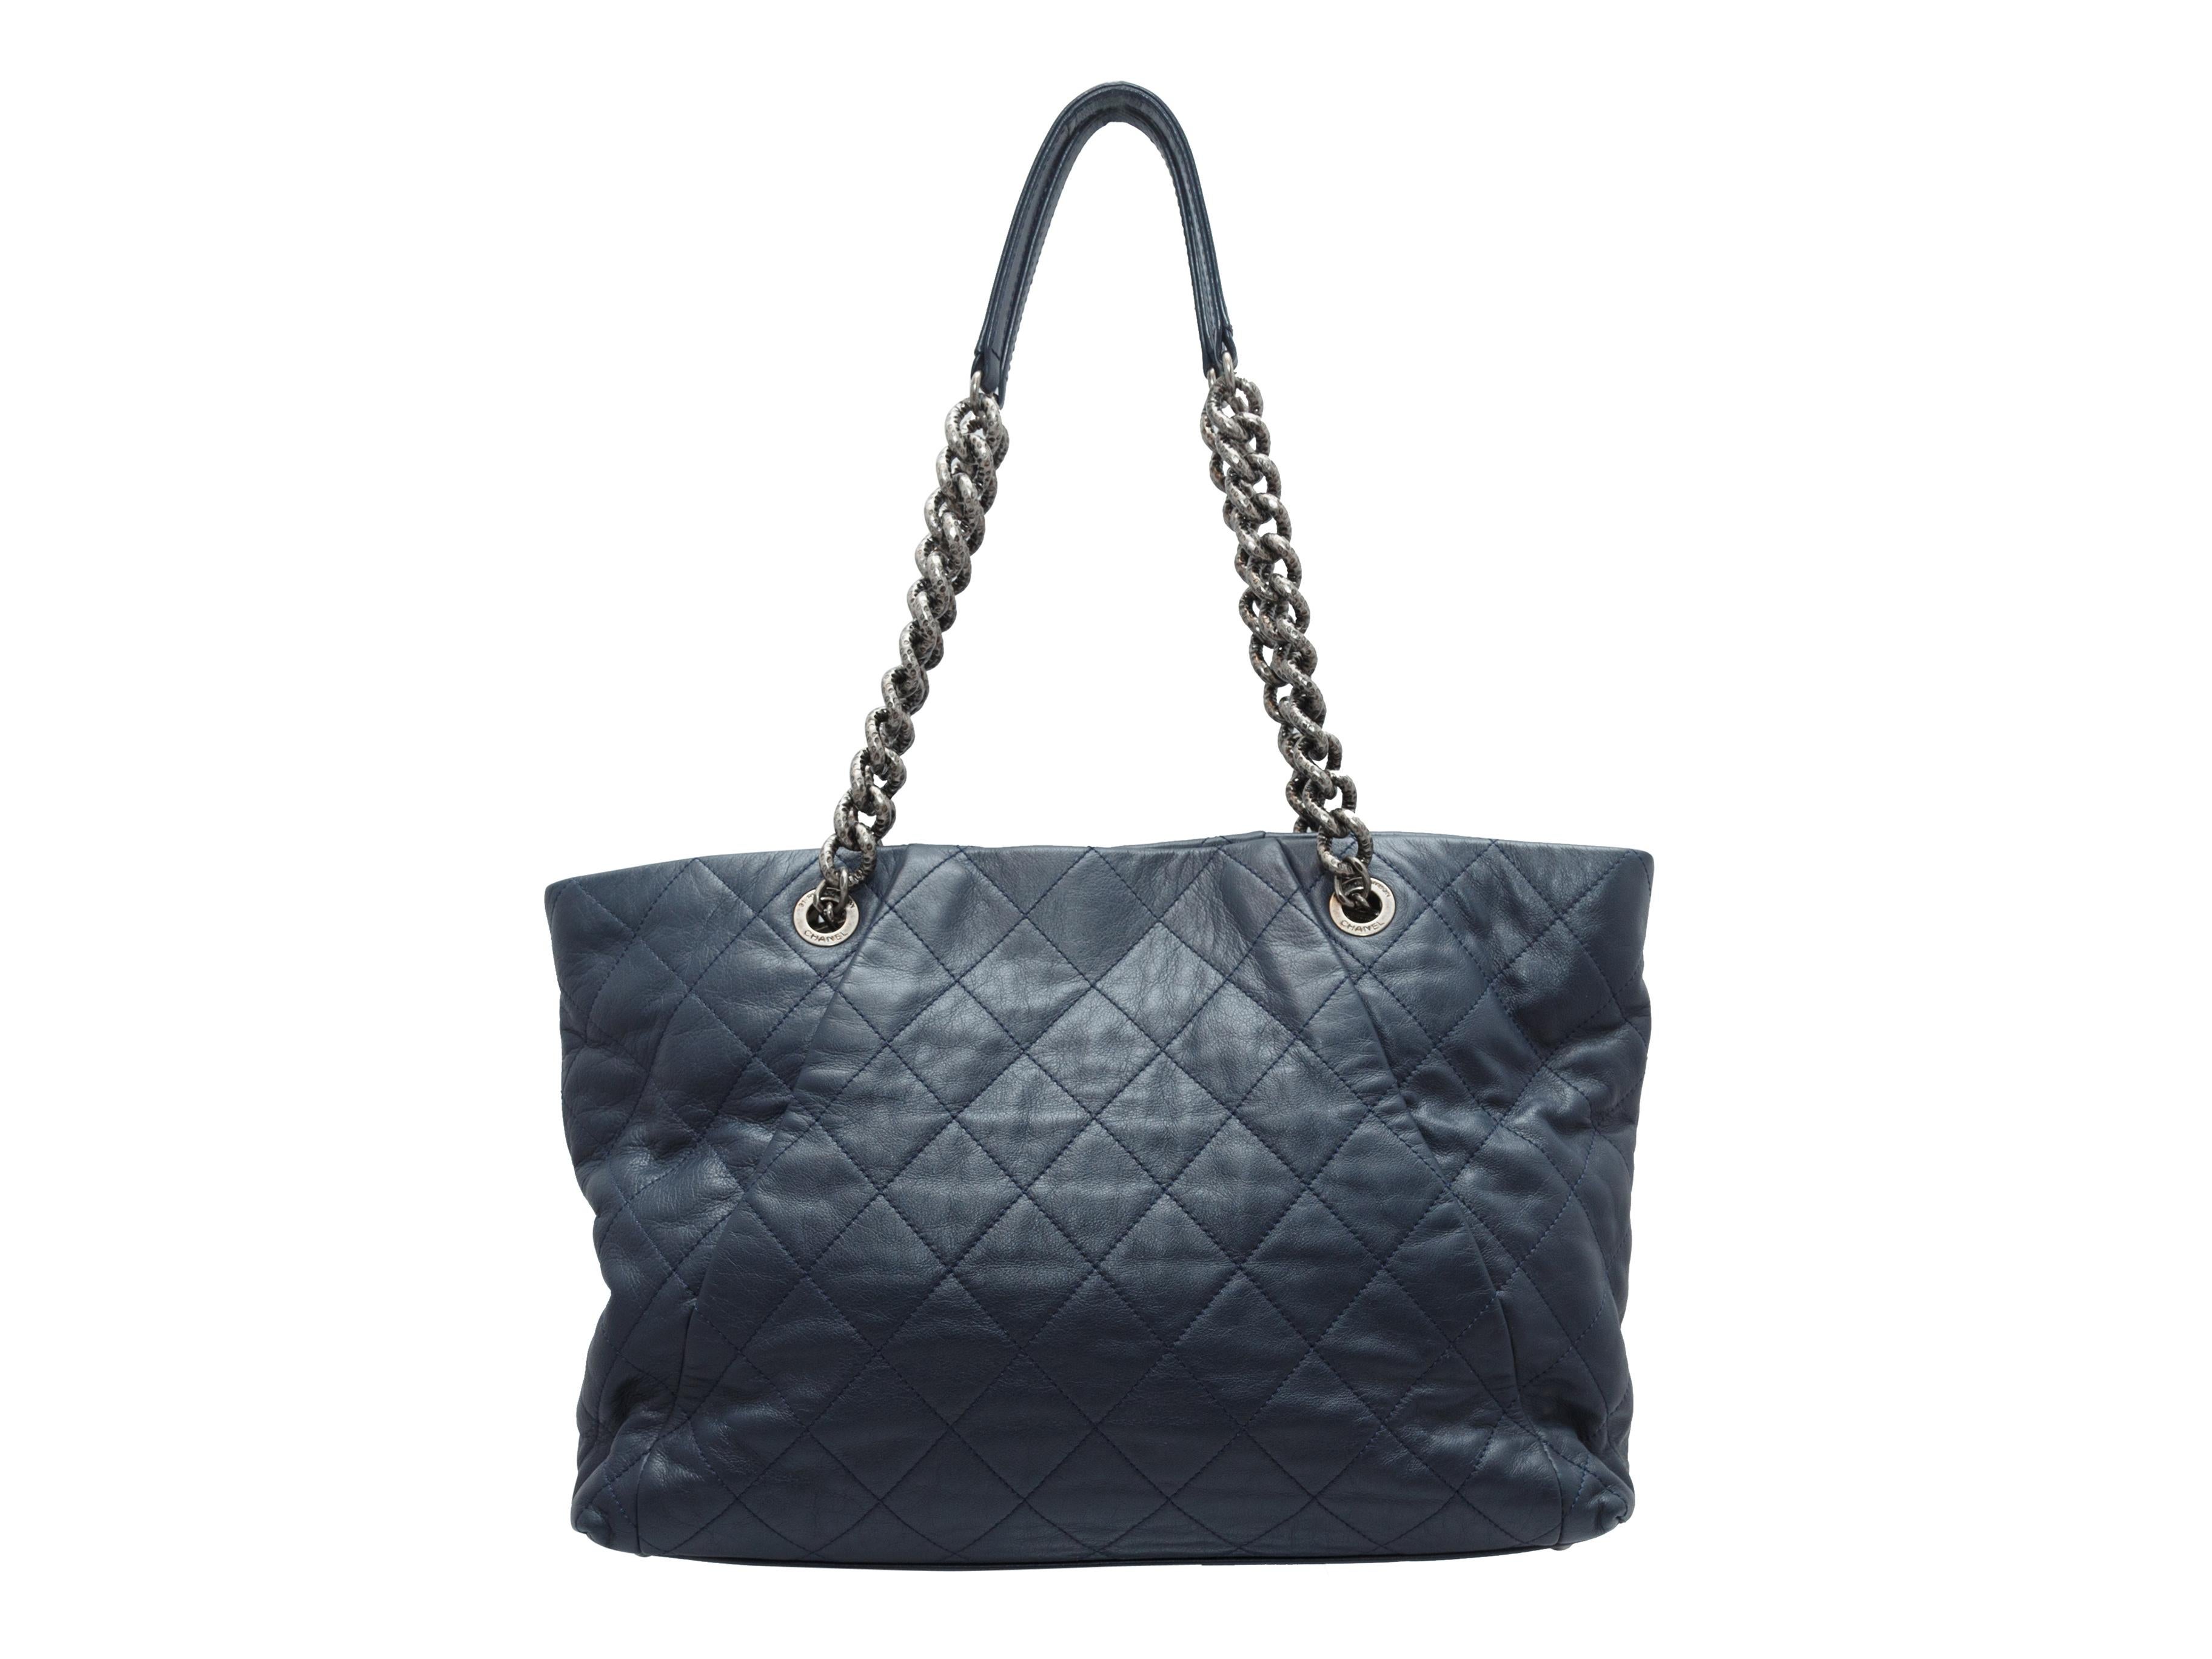 chanel navy tote